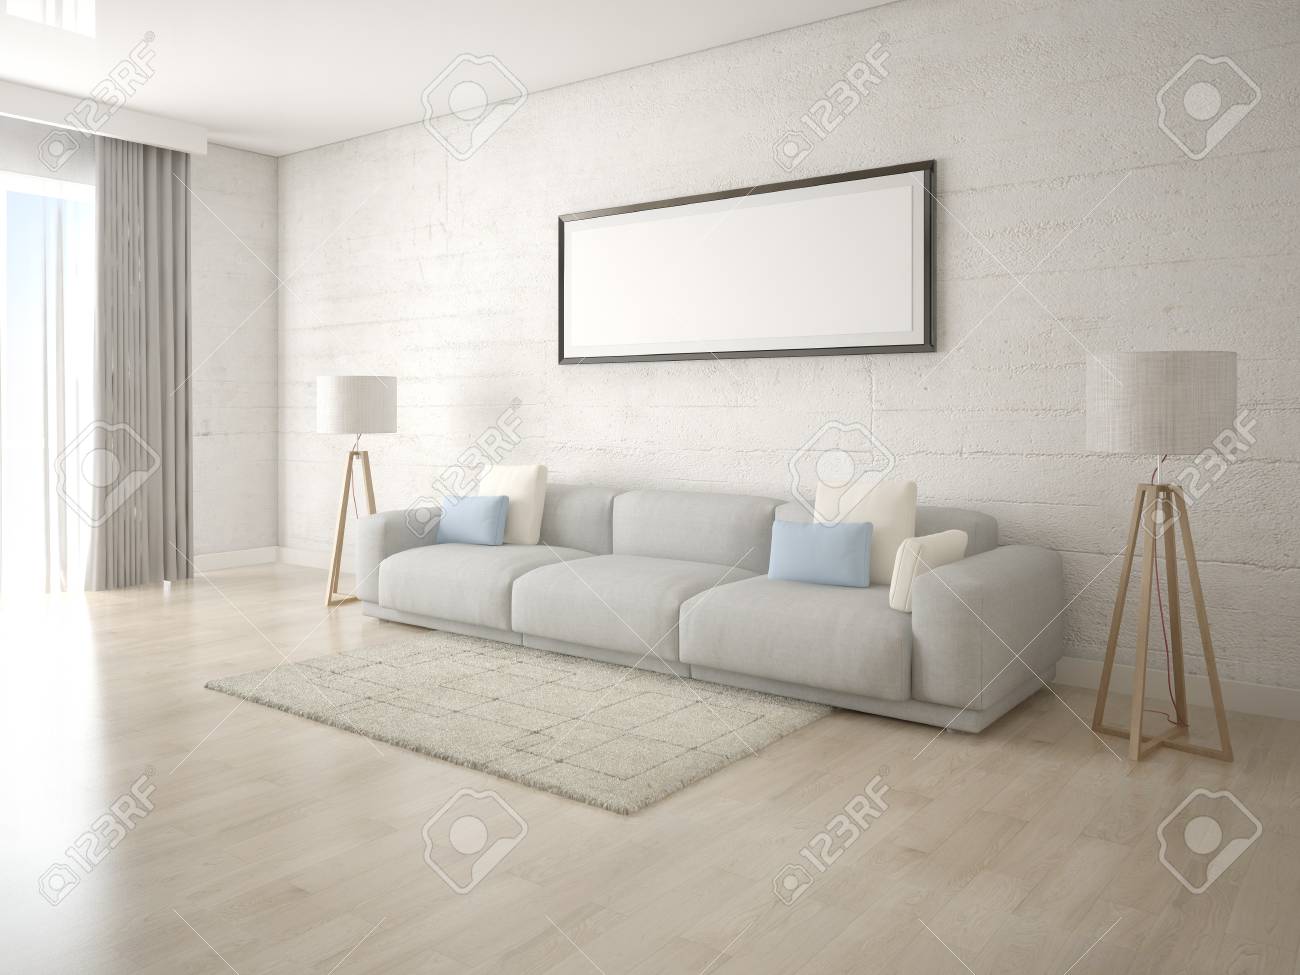 Mock Up A Creative Living Room With Light And Fortable